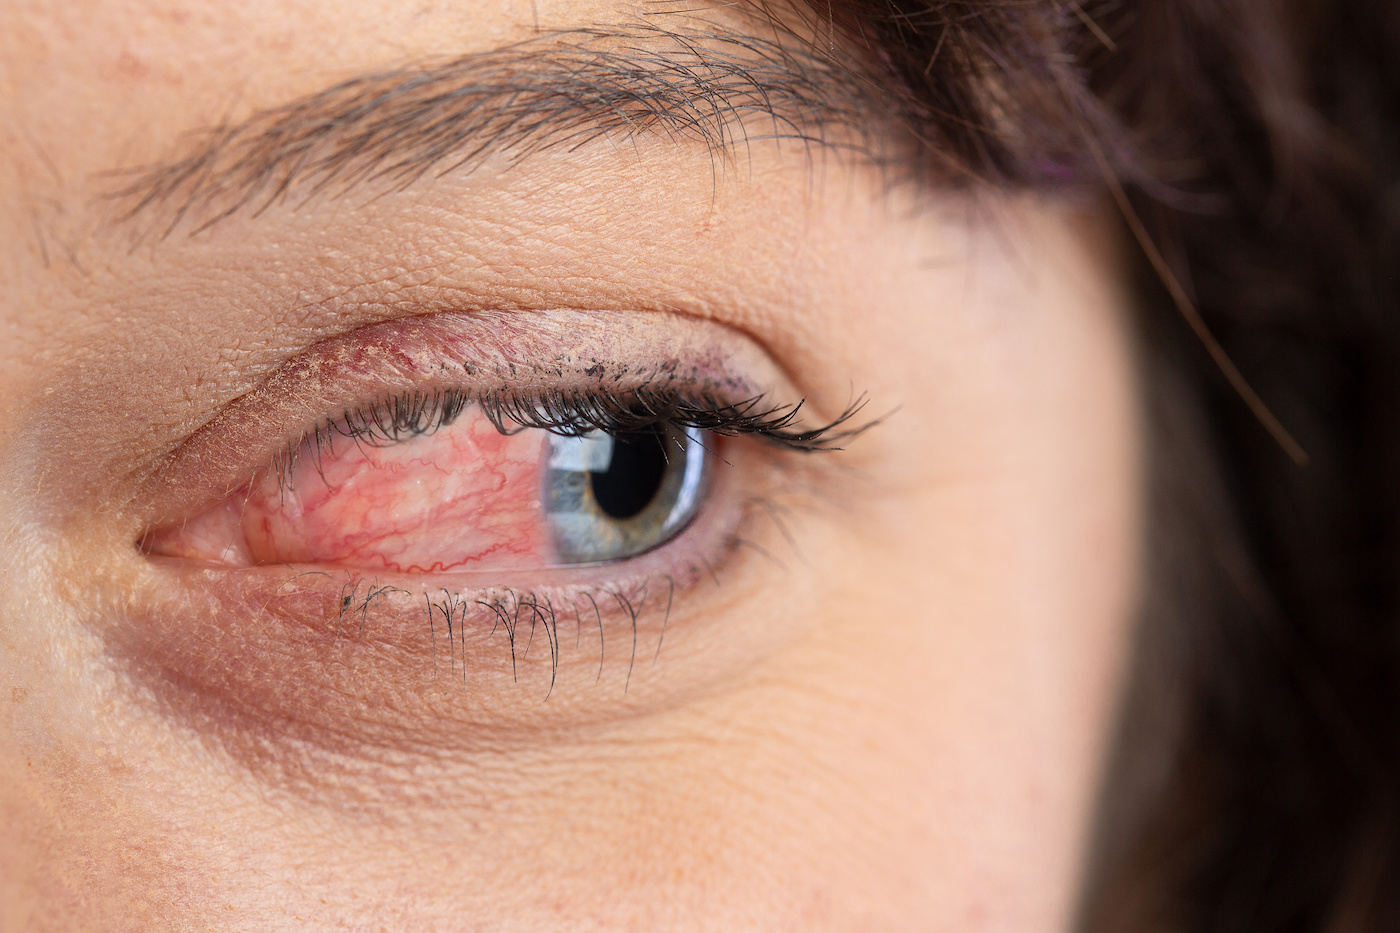 Close-up of an eye with visible redness and inflammation on the eyelid and surrounding area, highlighting the importance of finding ways to treat ocular rosacea effectively.